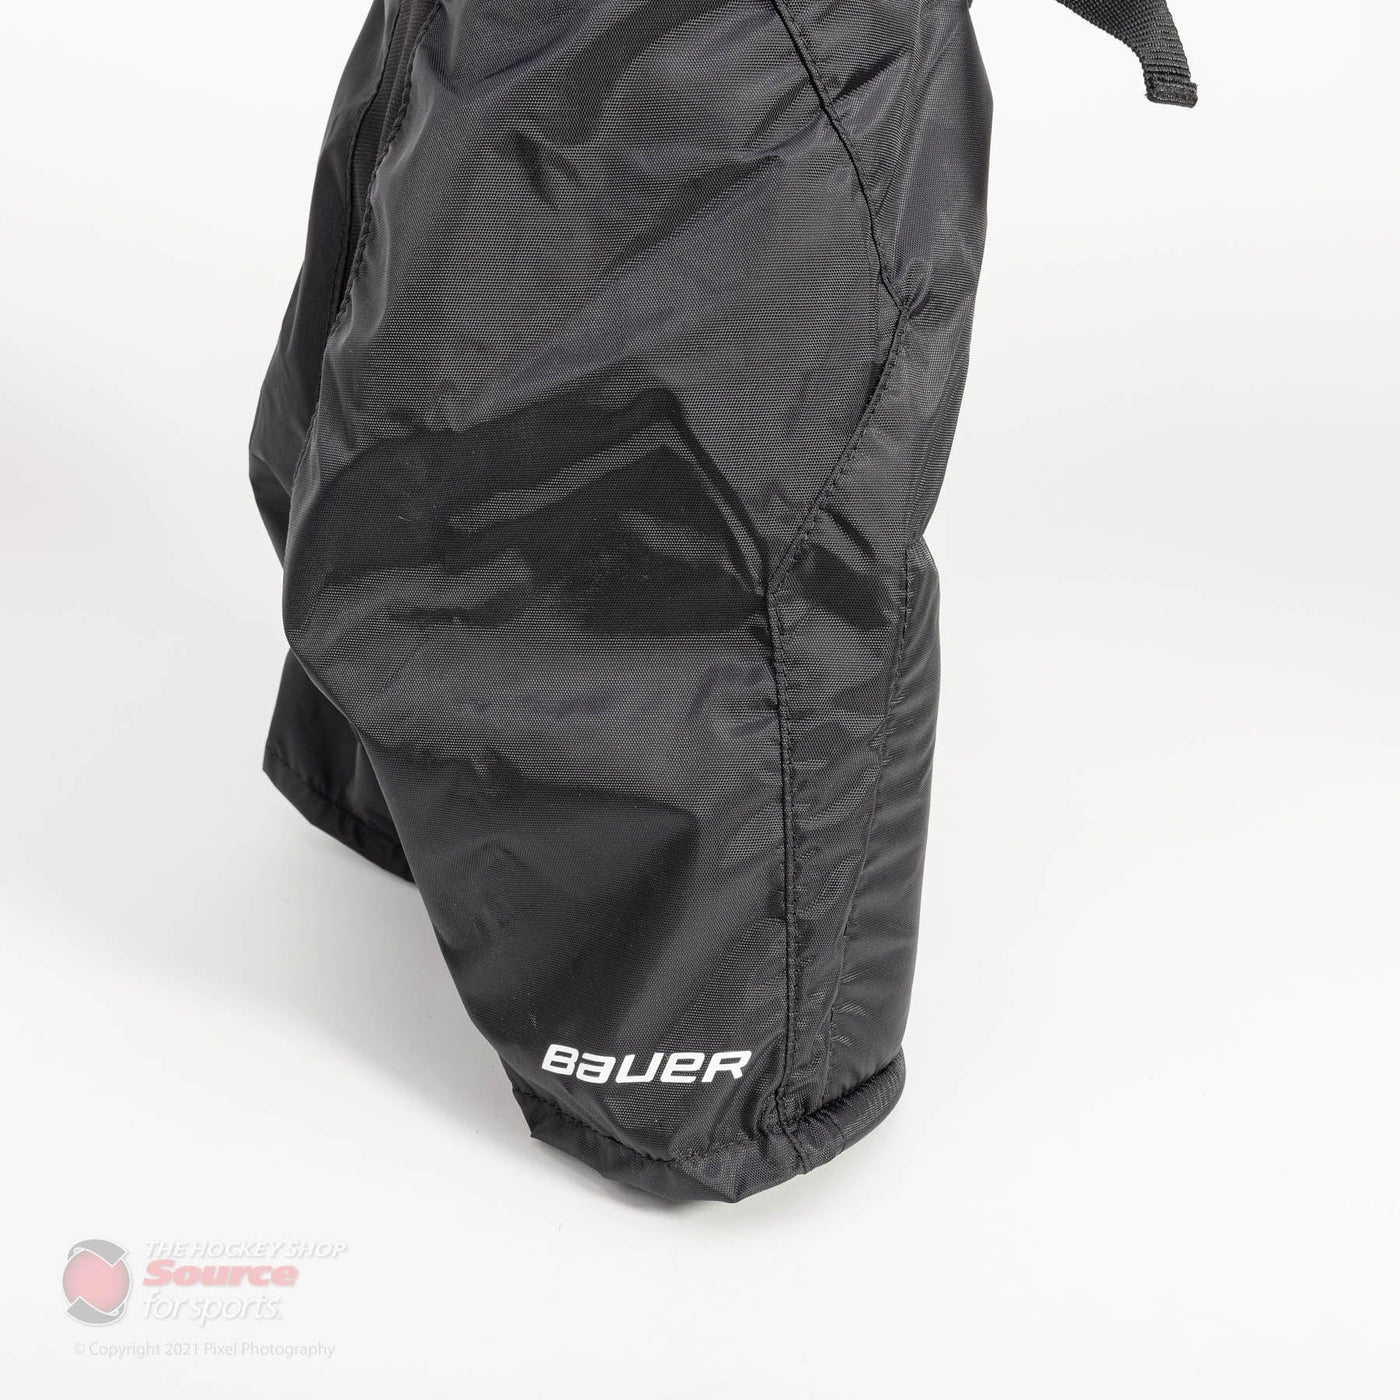 Bauer X Youth Hockey Pants